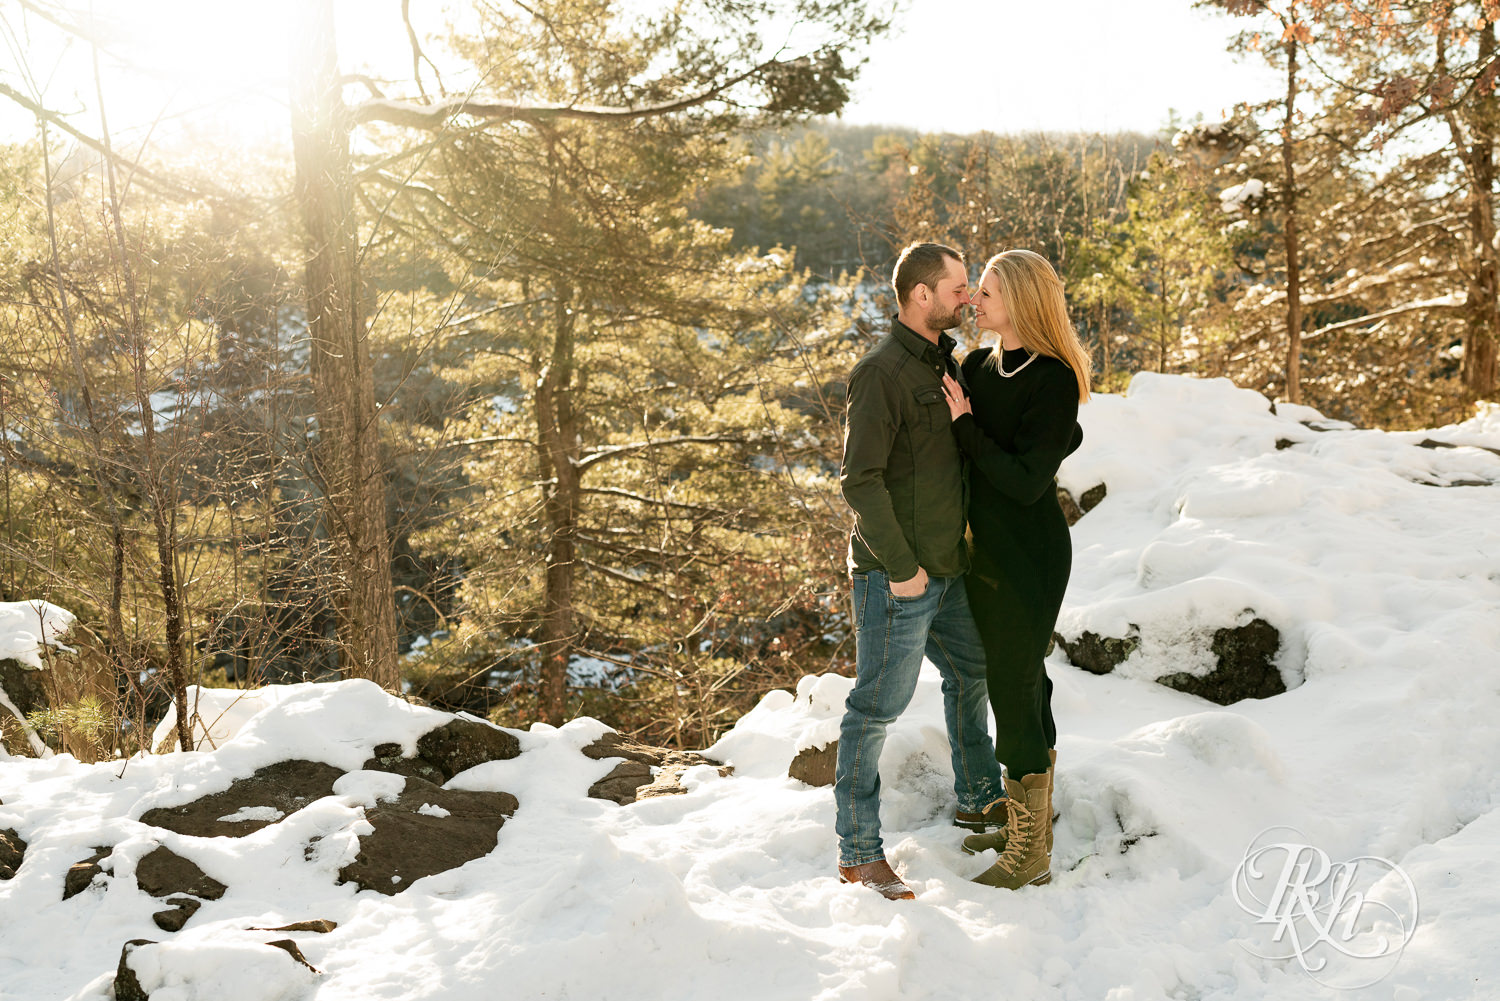 Man in jeans and woman in black dress smile in the snow at sunrise during Taylor's Falls engagement photography session.